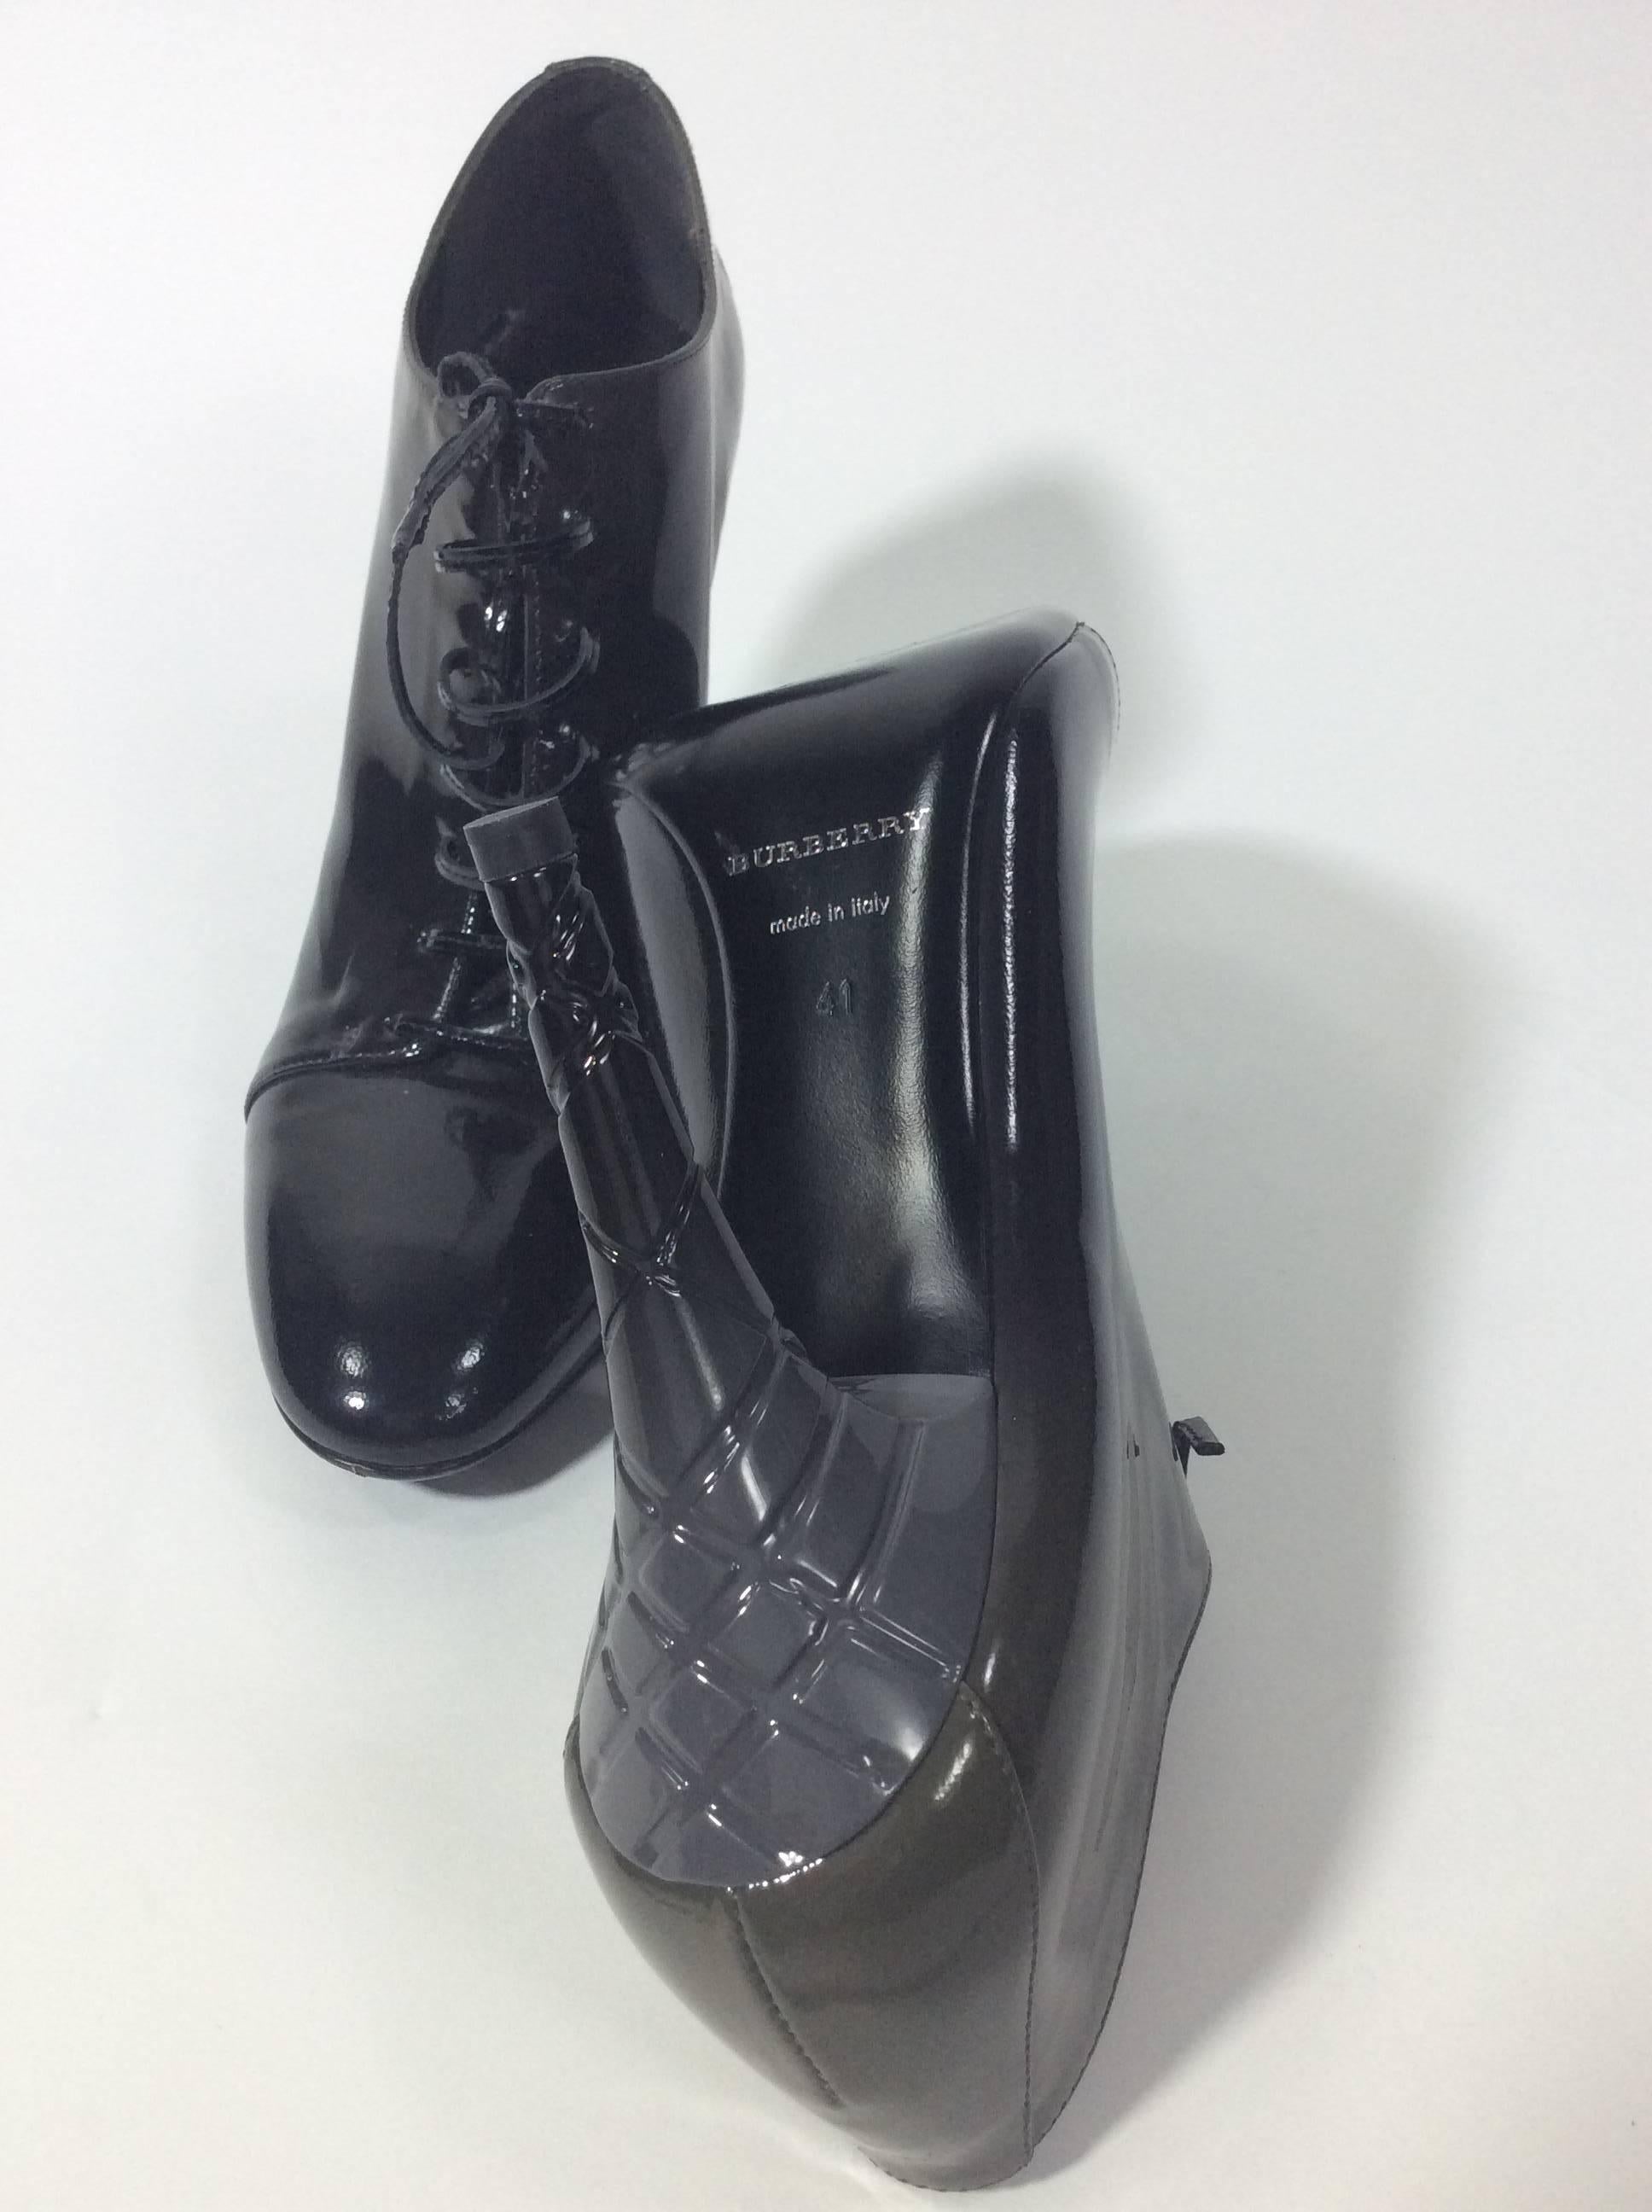 Patent Leather Lace Up Booties
3.5 inch heel
3 inch sole width
Patent shoe lace with lace up front closure
Grey to black ombre style
Heel includes signature Burberry plaid pattern
Size 41 (equates to US 41)
Patent leather upper, leather lining